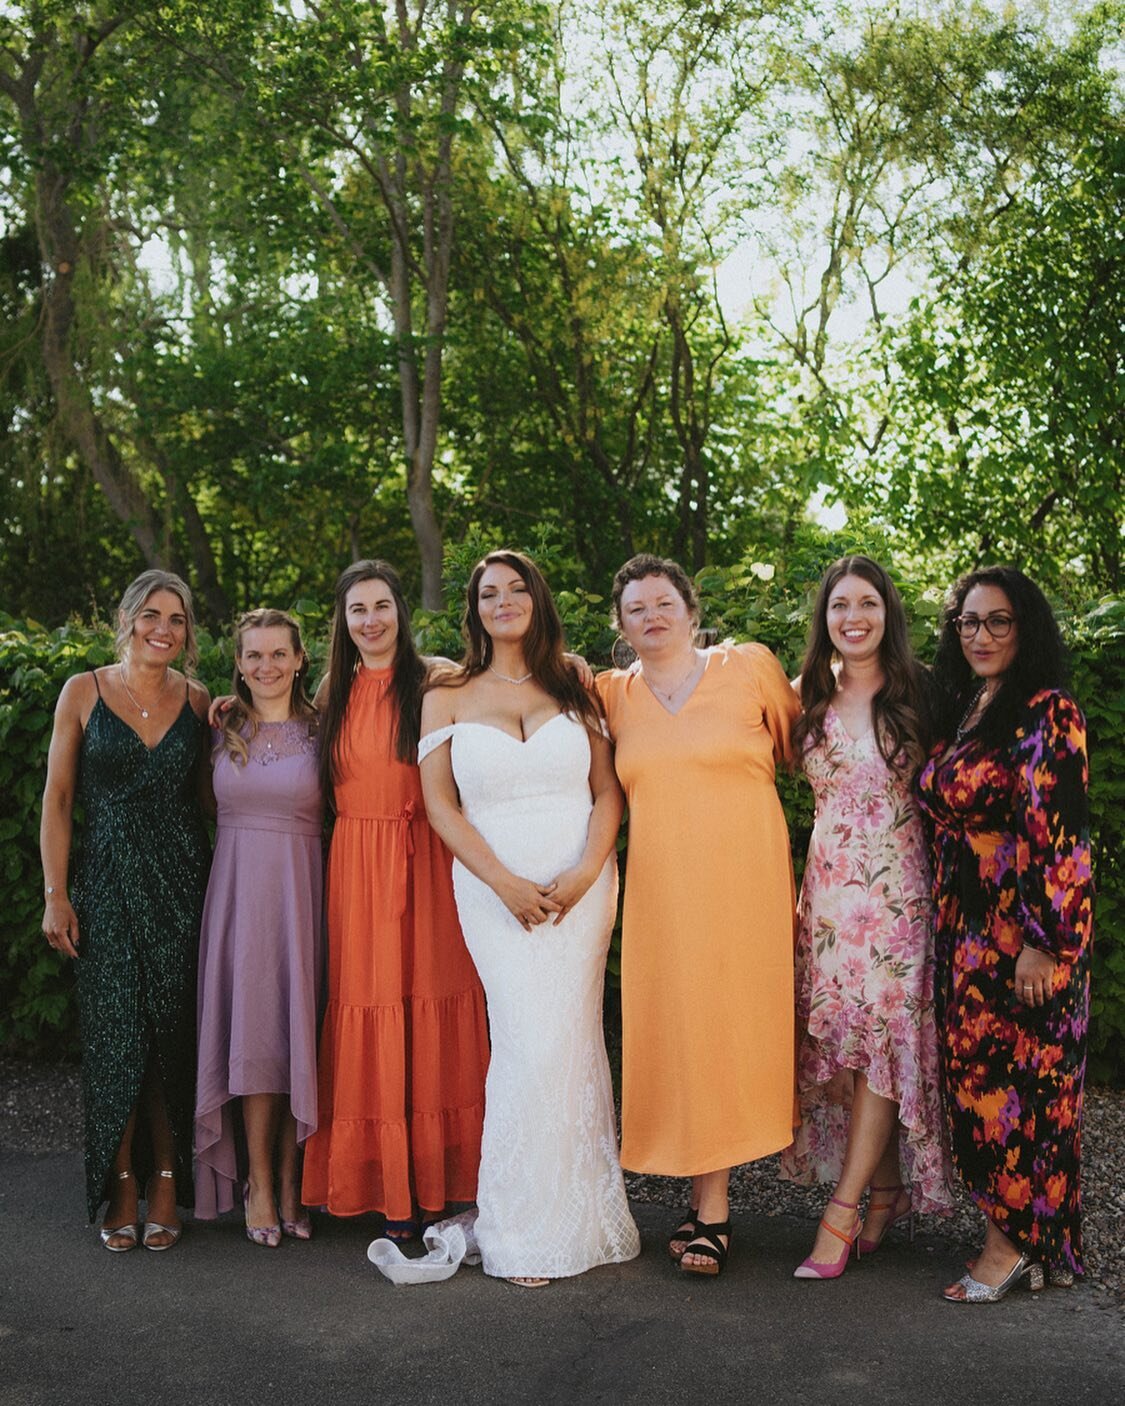 I&rsquo;m sorry but I can&rsquo;t get enough of them!!😍 

Mai and her best friends 🤩. Stunning!

#bridemaids #bridemaidsdresses #bryllupsfotograf #fynbryllupsfotograf #odensebryllupsfotograf #copenhagenbryllup #bryllupdenmark #weddingphotographer #